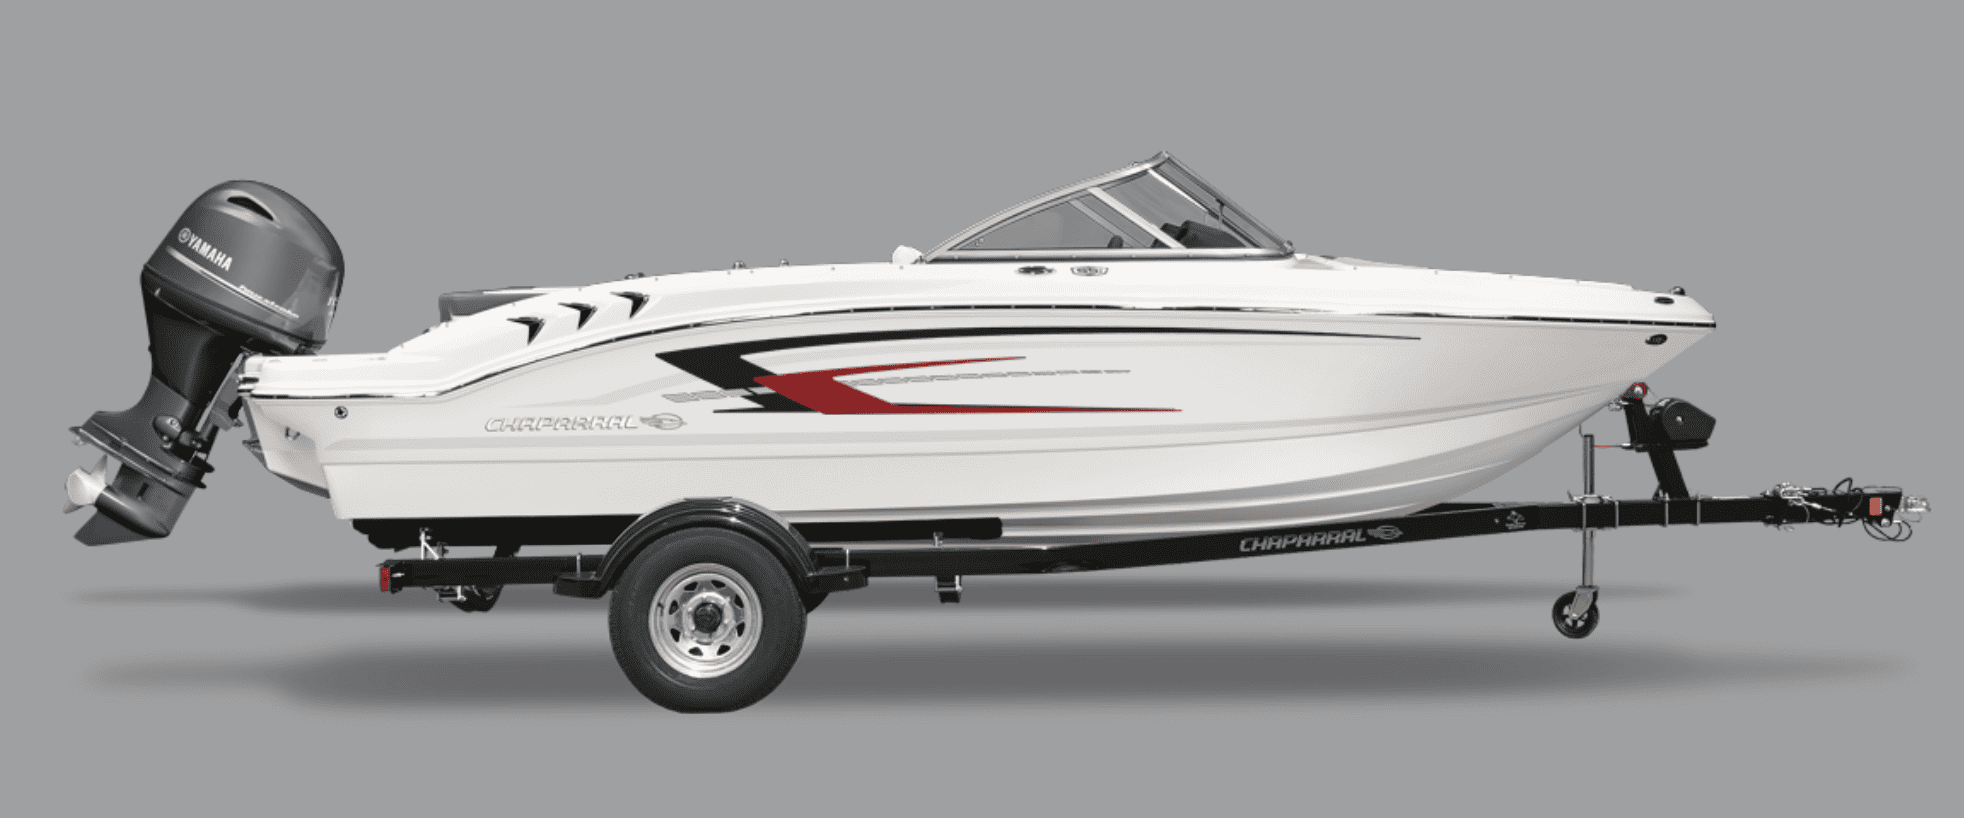 Chaparral Boats, Jet & Powerboats